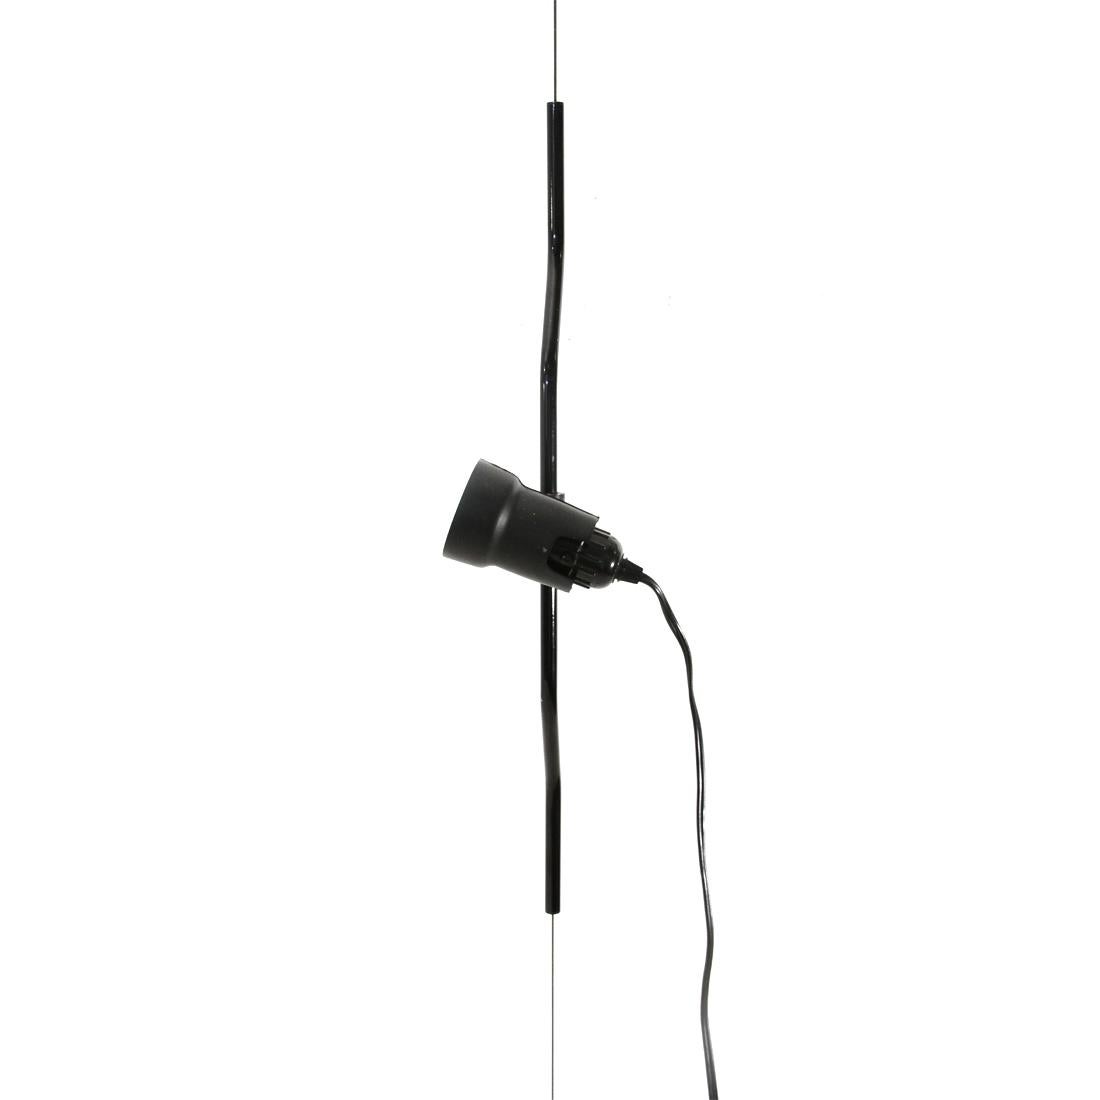 Suspension lamp produced by Flos and designed by Achille Castiglioni in the 1970s.
Steel cable held in tension by a weight covered in black rubber.
Height-adjustable curved black painted steel tubing.
Light body in black plastic,